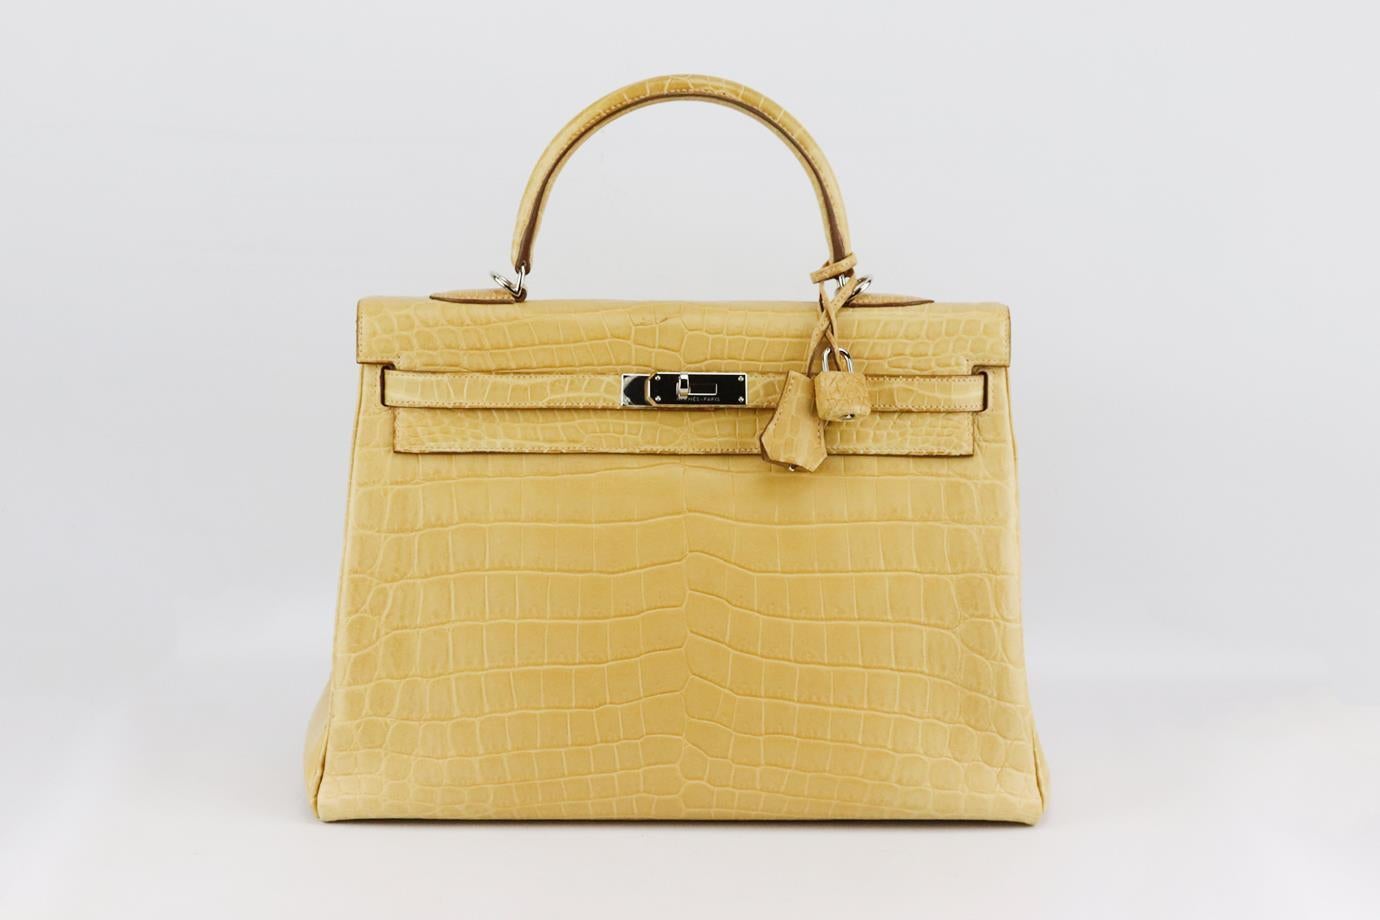 Hermès 2016 Kelly Retourne 35cm Matte Niloticus Crocodile leather bag. Made in France, this beautiful 2016 Hermès ‘Kelly Retourne’ handbag has been made from beige ‘Niloticus Crocodile’ exterior in ‘Paille’ with matching leather interior, this piece